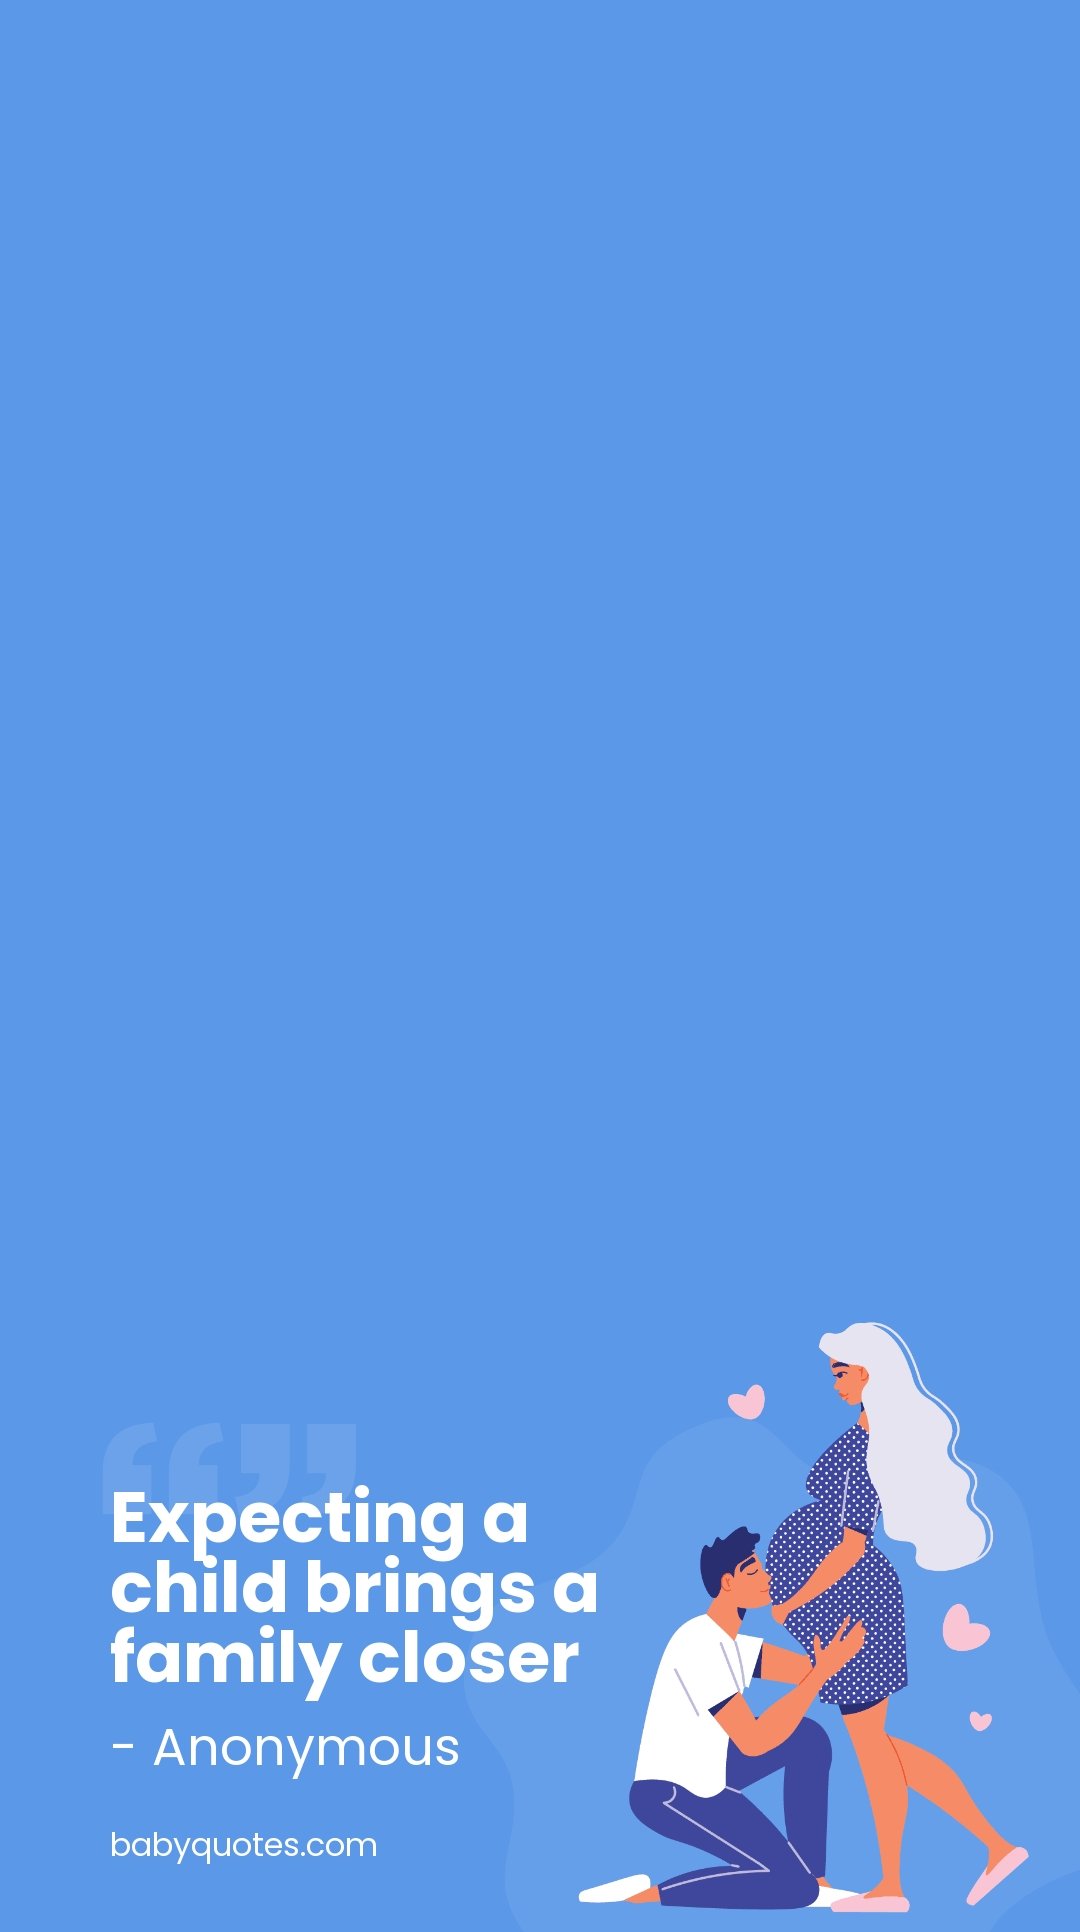 Pregnancy Announcement Quote Snapchat Geofilter Template